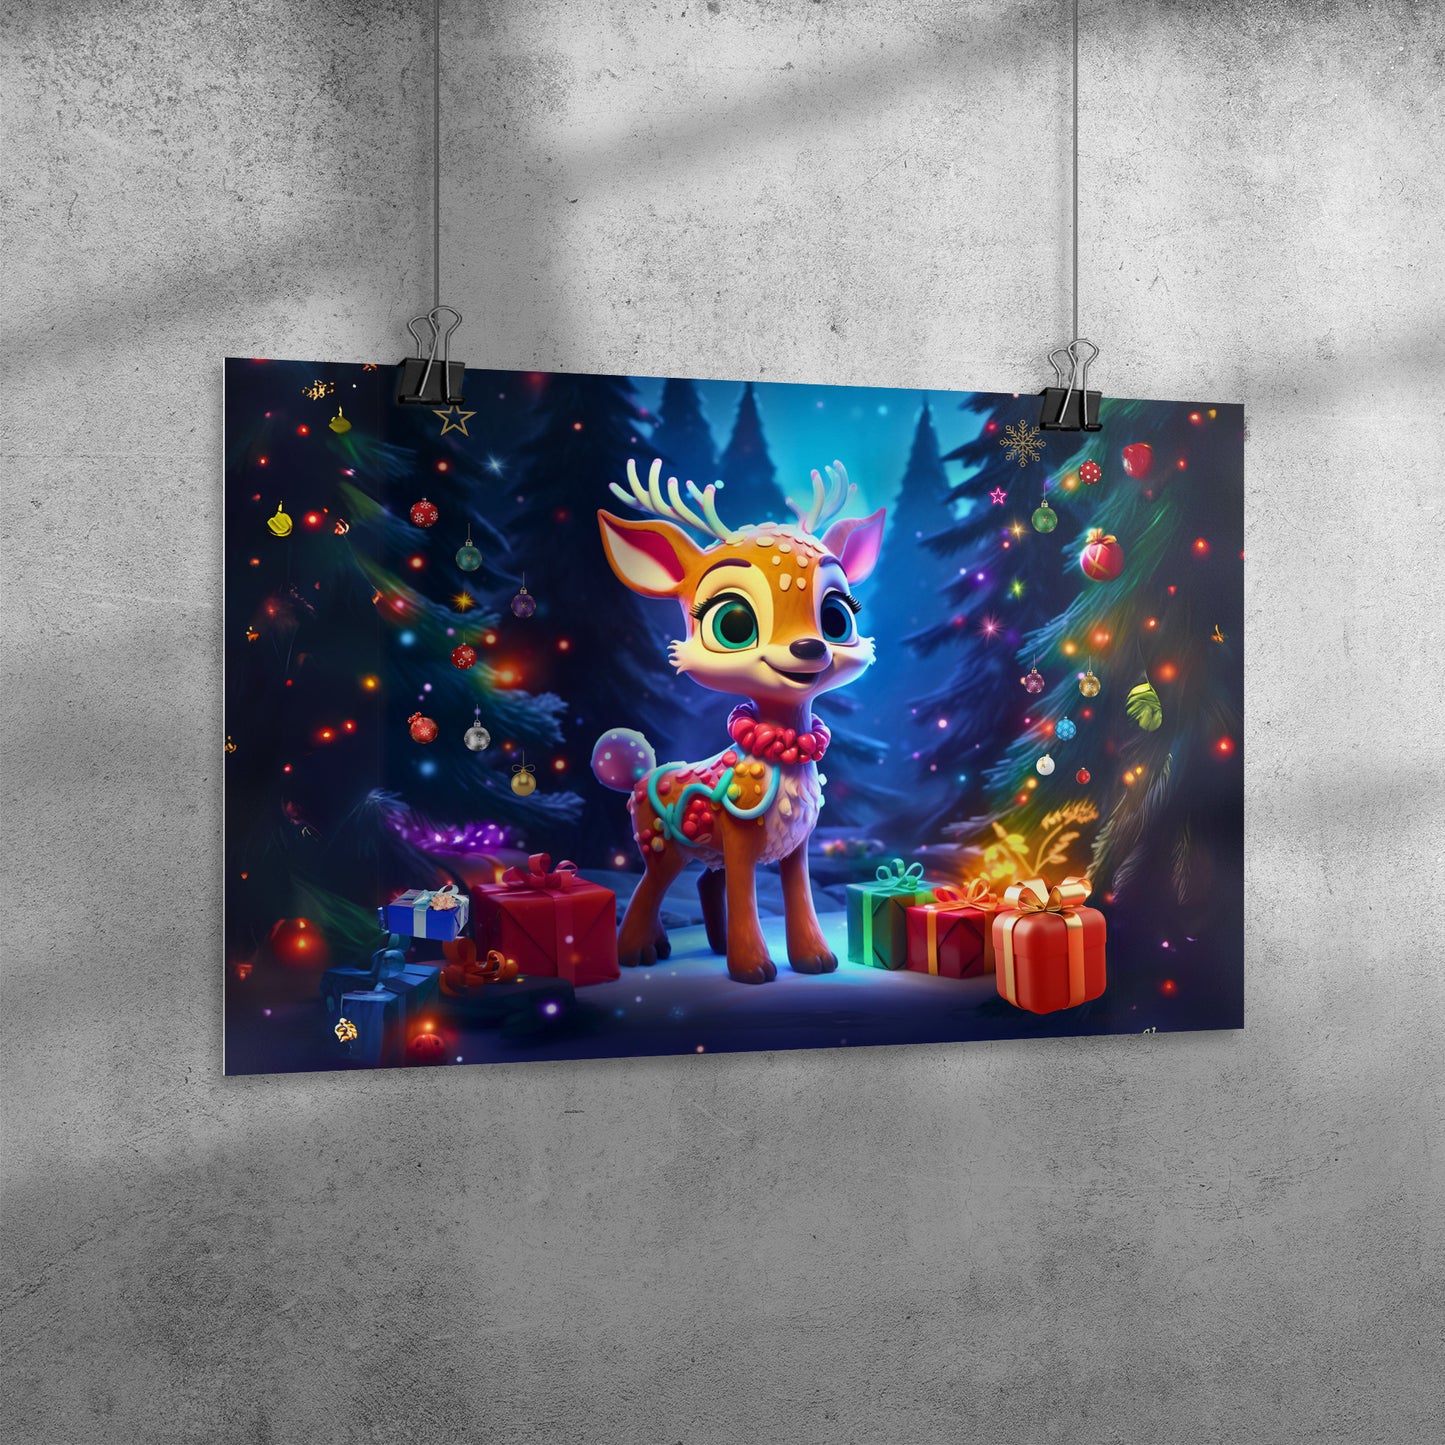 Poster 20" x 30" - Christmas and the Joy of Giving